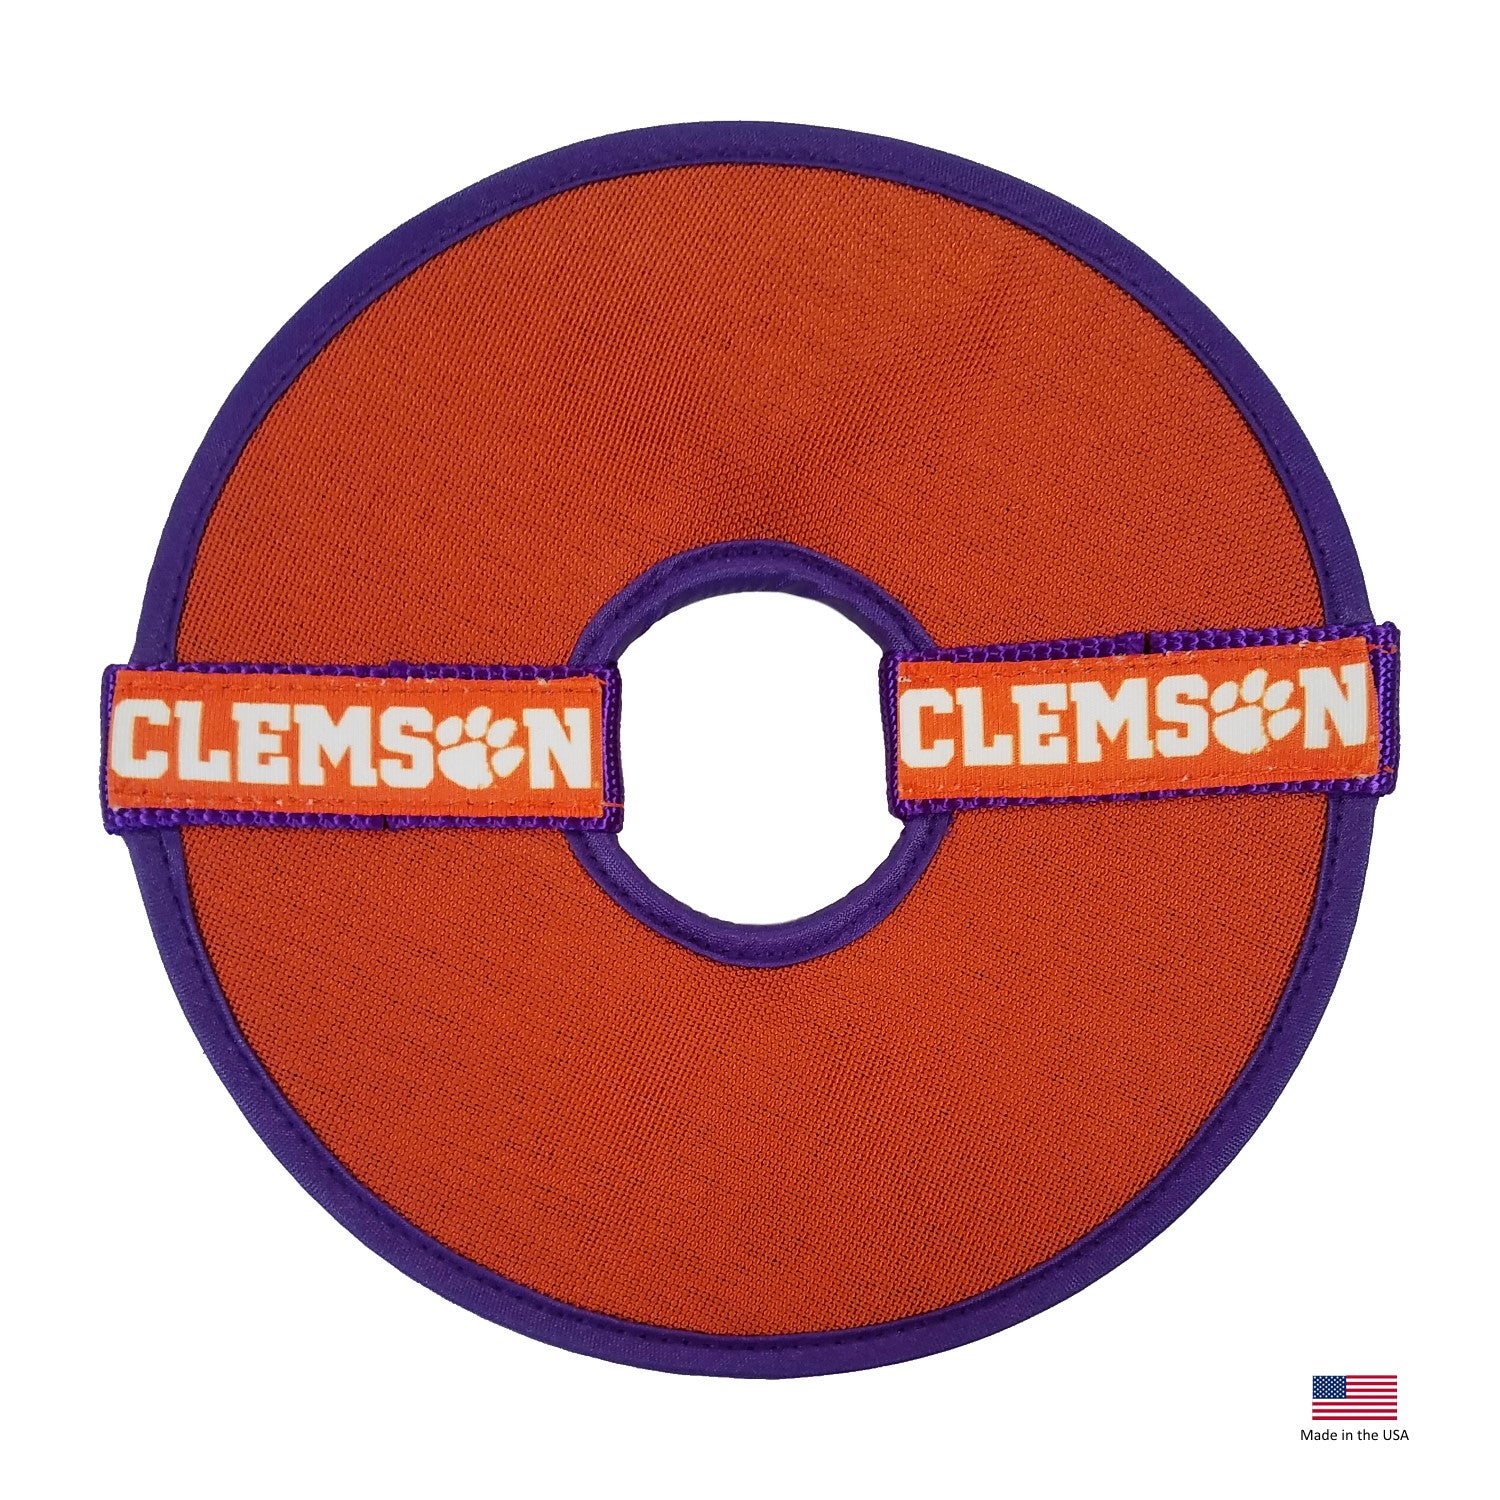 Clemson Tigers Flying Disc Toy